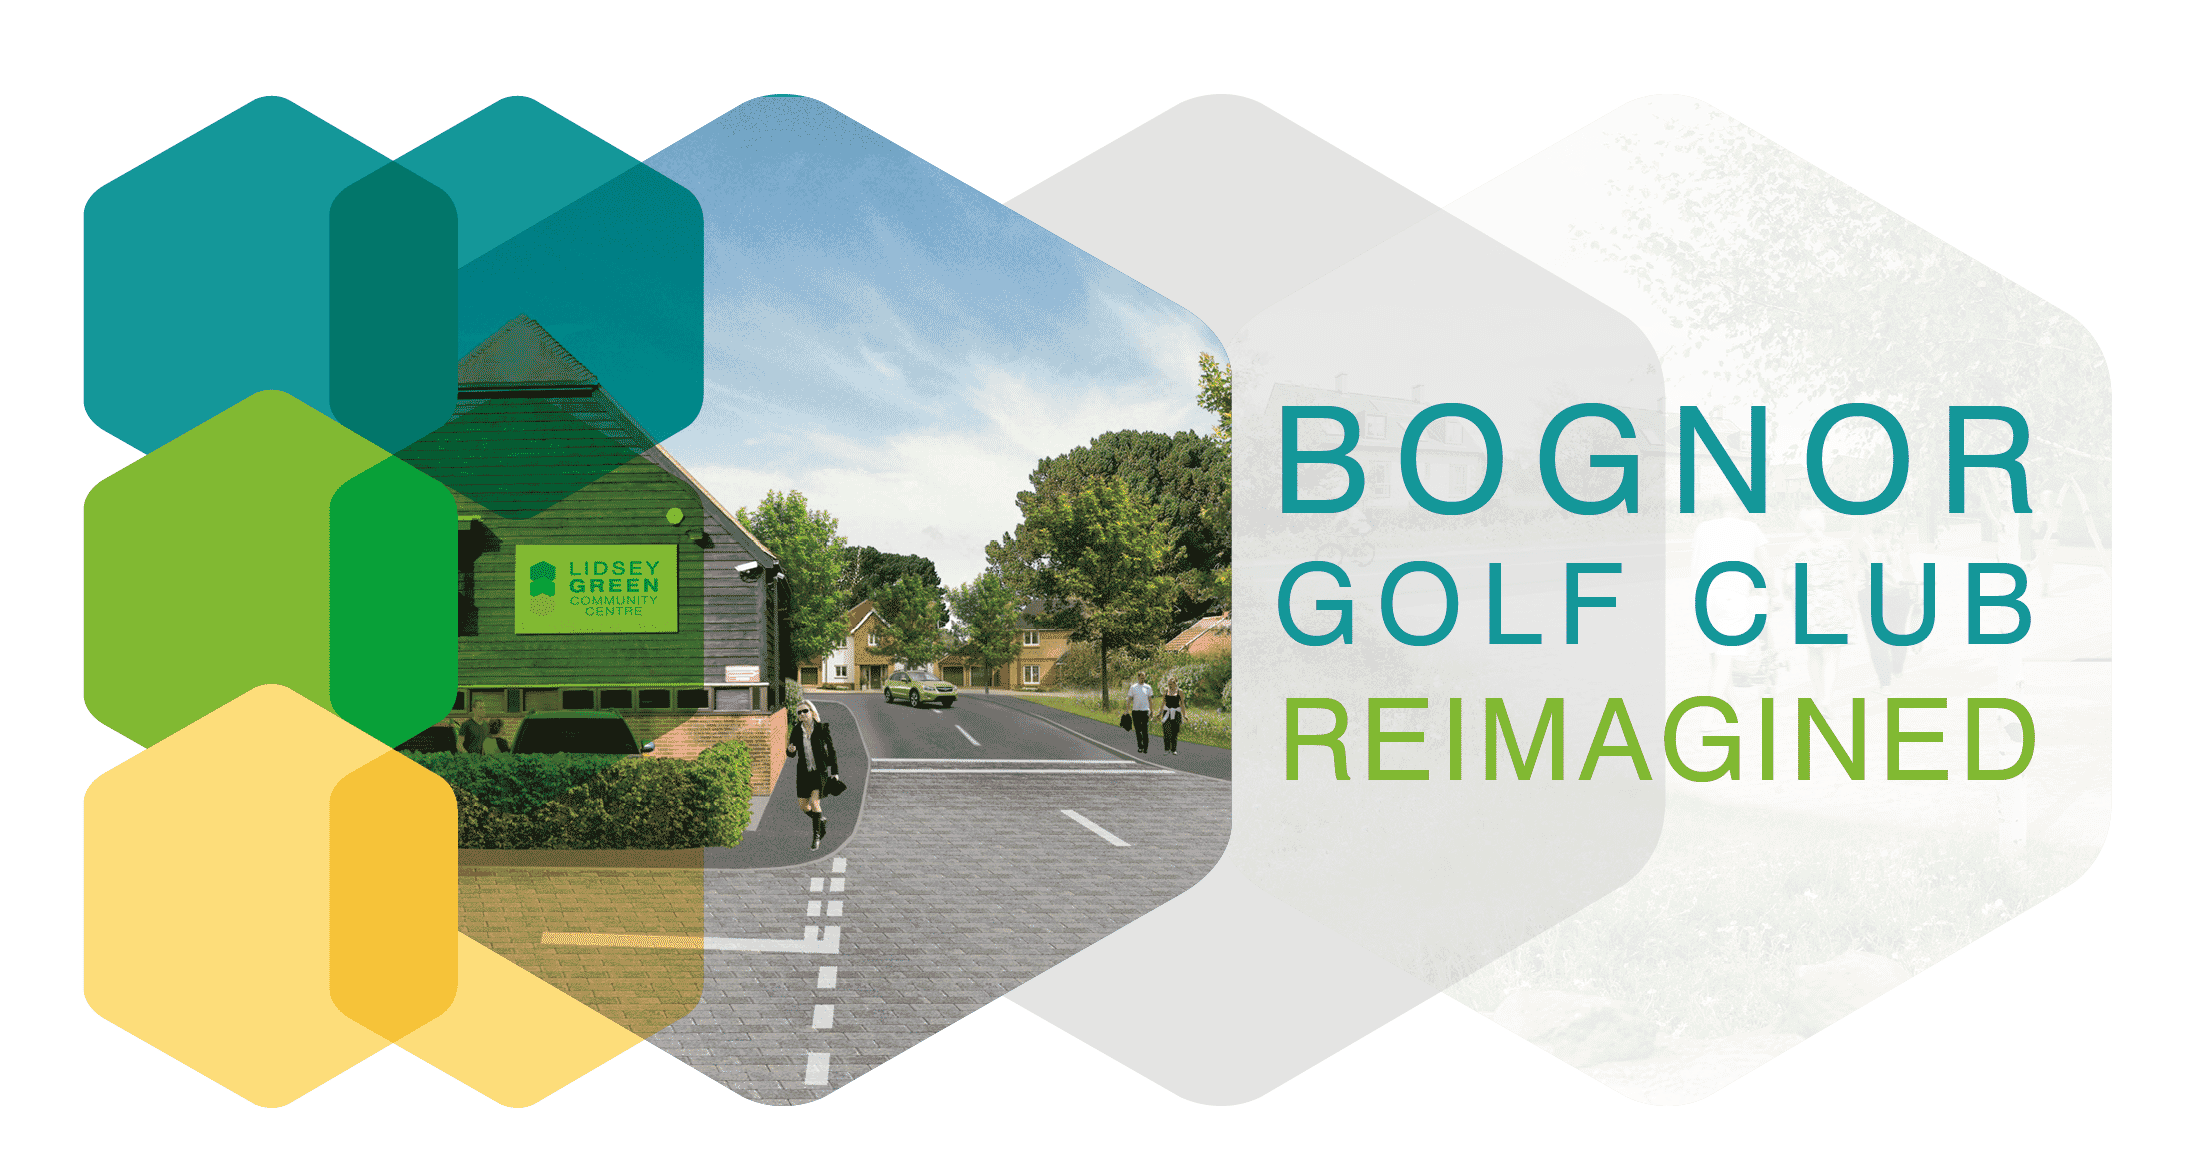 Welcome to Our Plans for Bognor Regis Golf Club